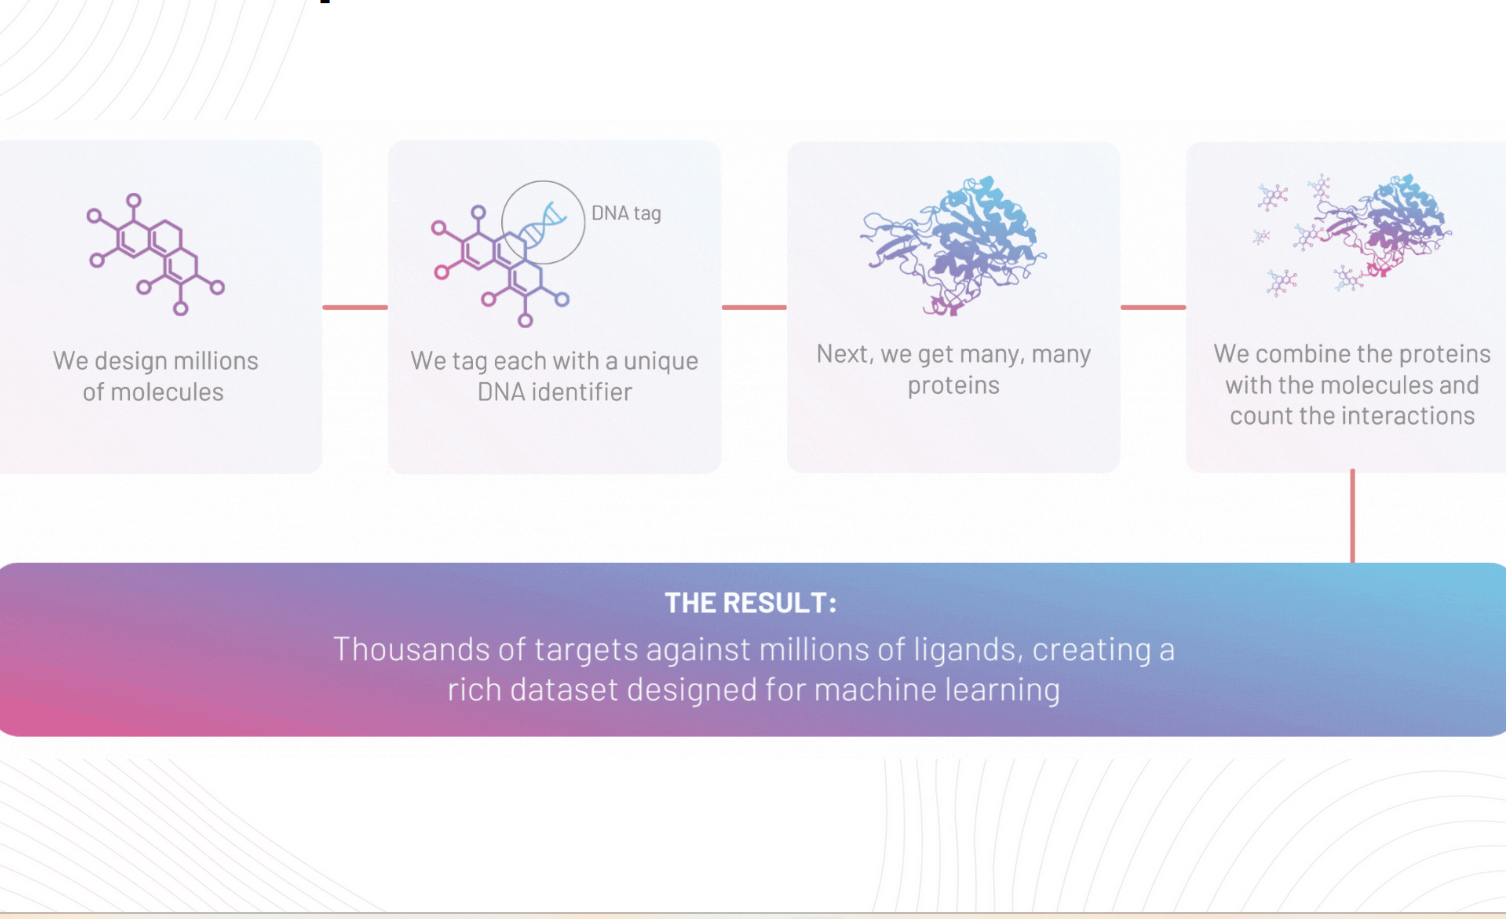 Leash Biosciences announced a successful funding round and launched an ML competition